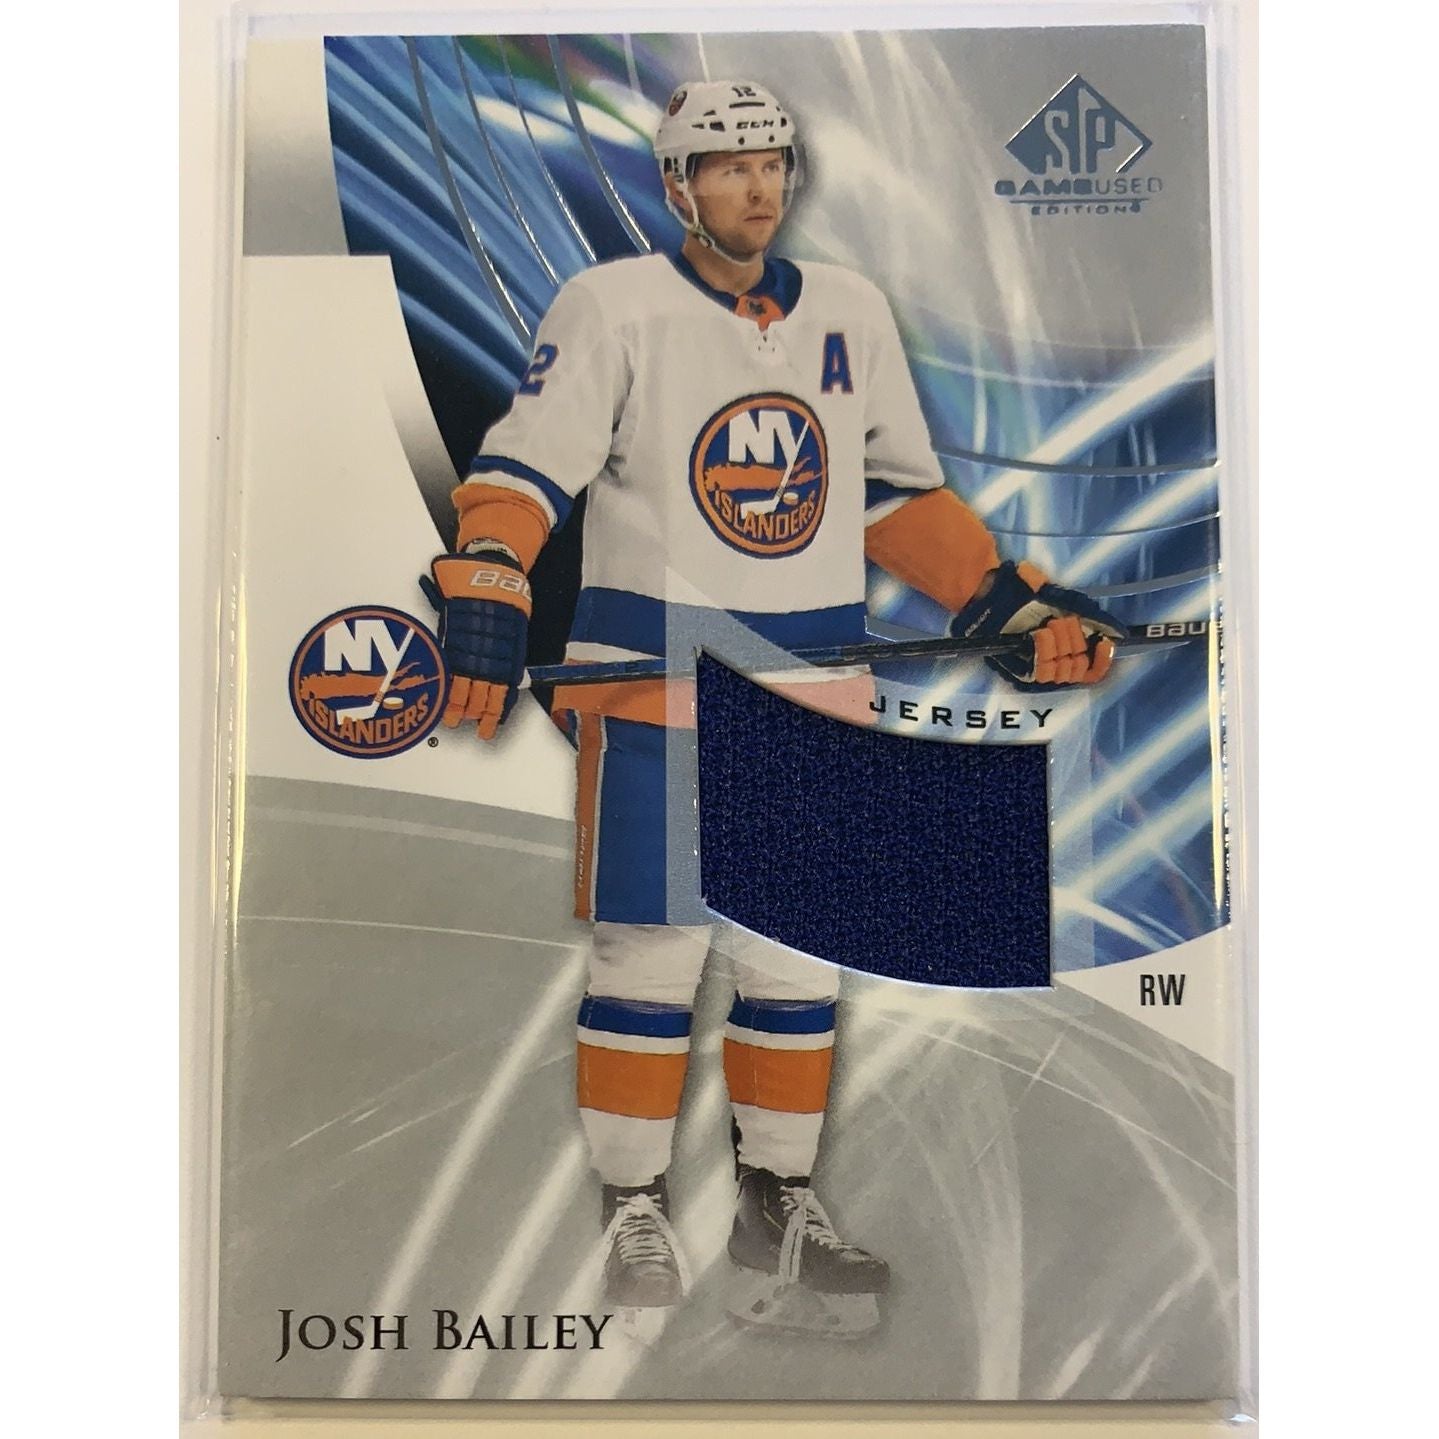  2020-21 SP Game Used Edition Josh Bailey Patch Card  Local Legends Cards & Collectibles